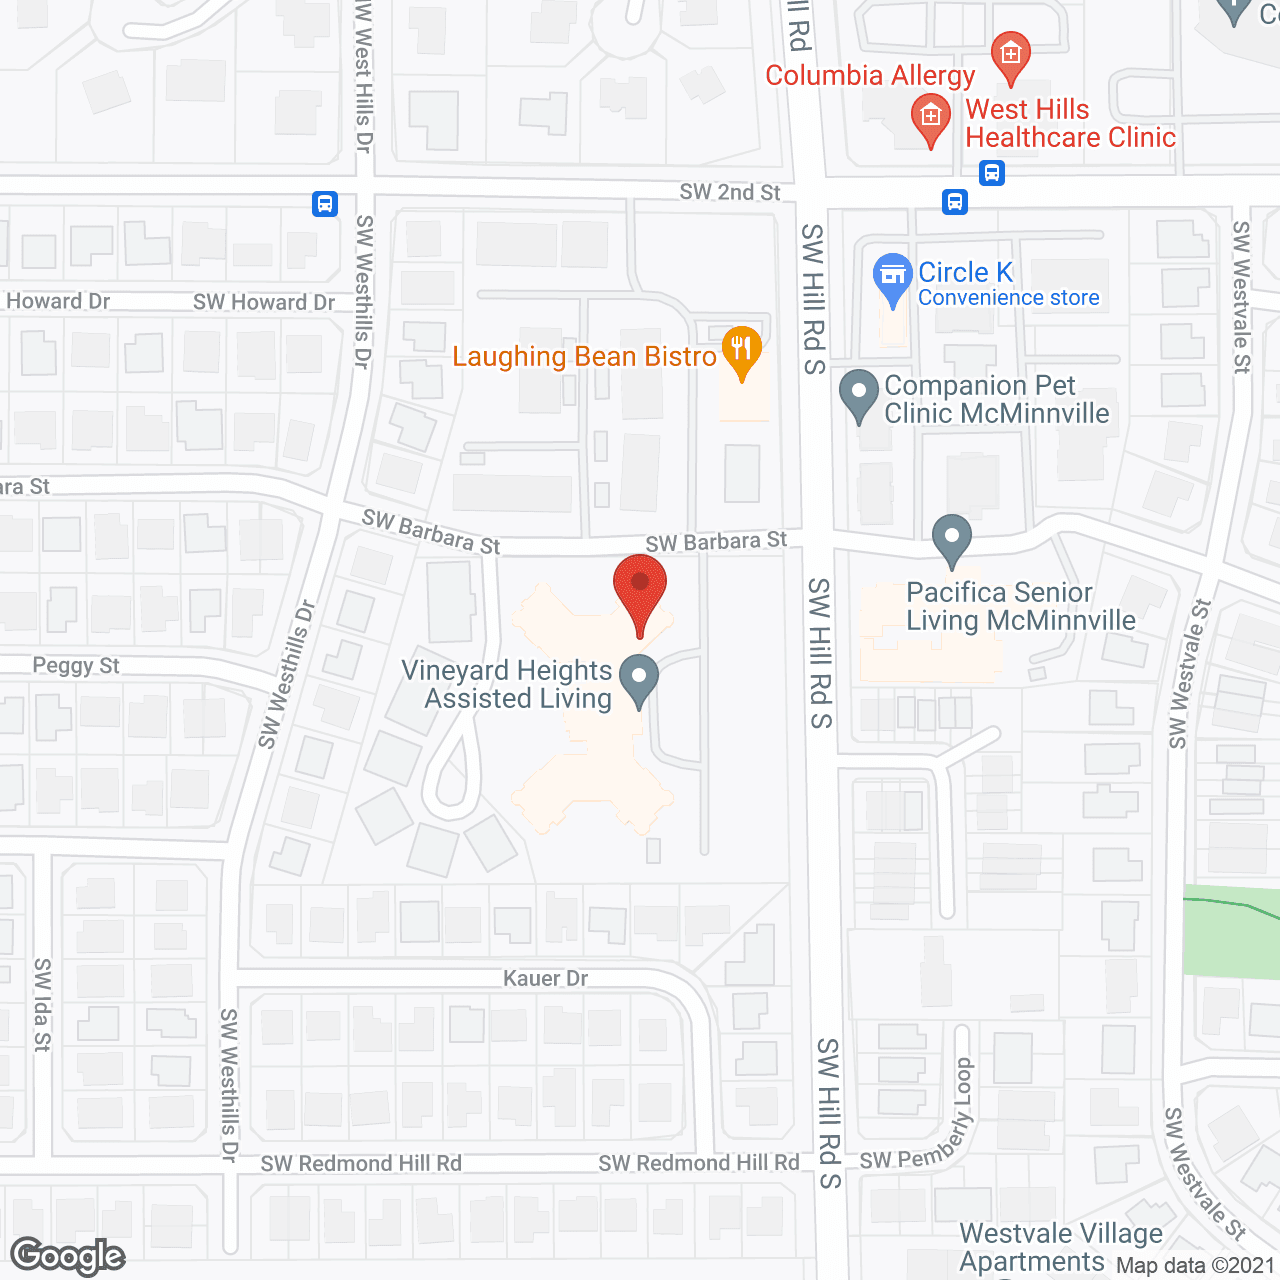 Vineyard Heights Assisted Living in google map